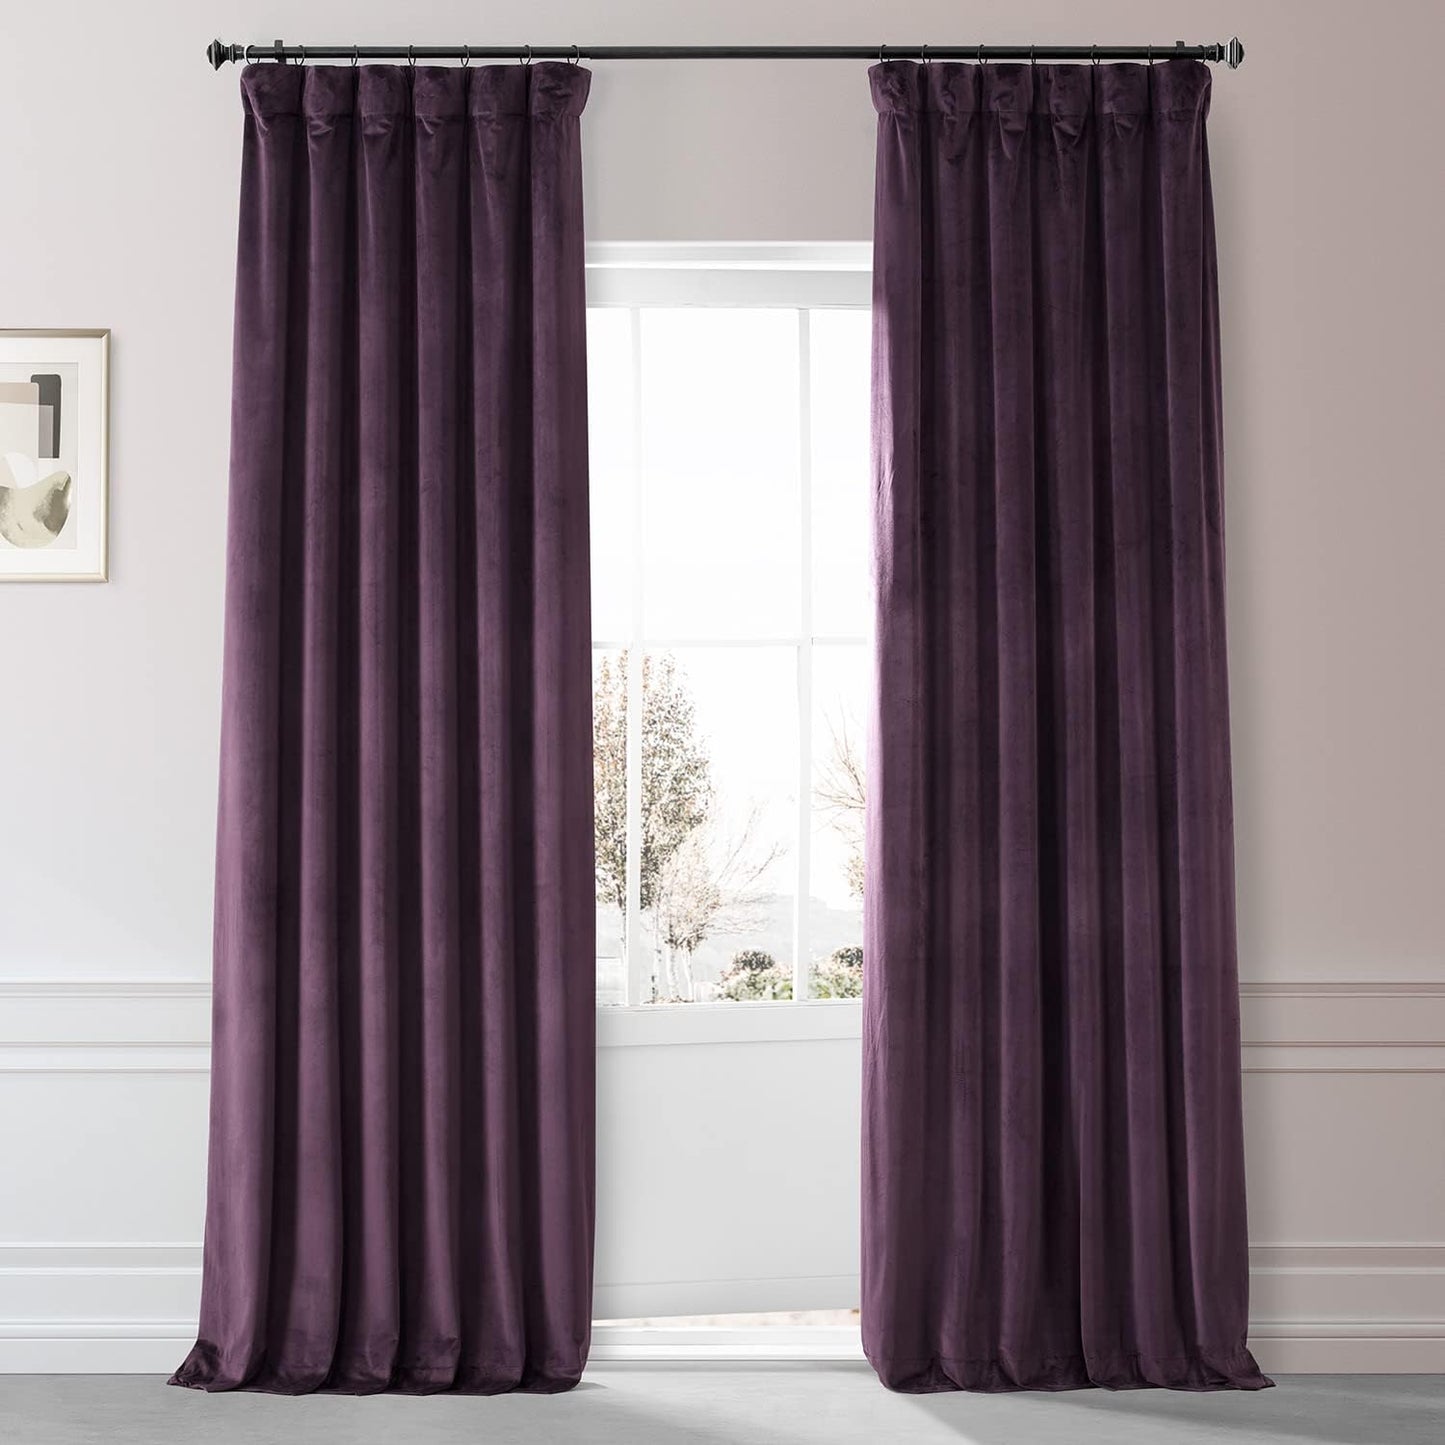 HPD HALF PRICE DRAPES Blackout Solid Thermal Insulated Window Curtain 50 X 96 Signature Plush Velvet Curtains for Bedroom & Living Room (1 Panel), VPYC-SBO198593-96, Diva Cream  Exclusive Fabrics & Furnishings Plum Blossom 50 X 108 